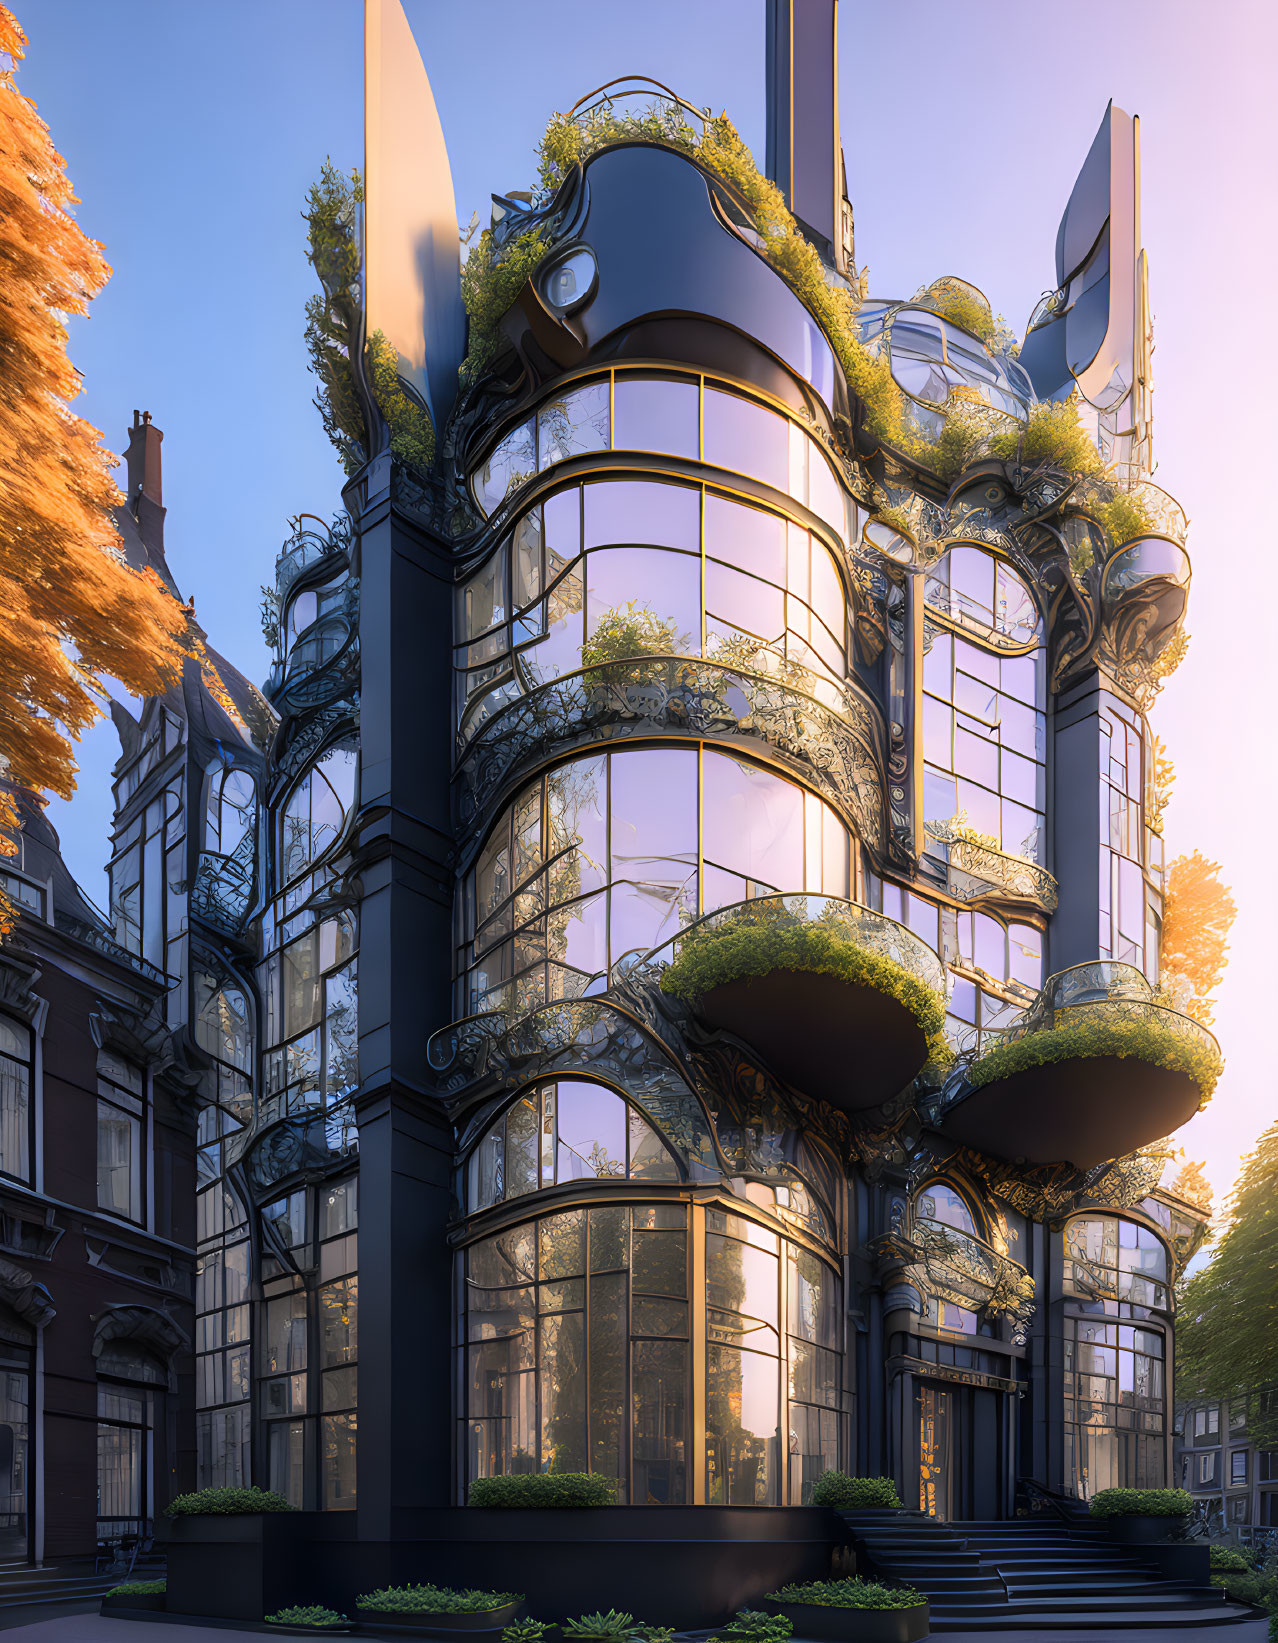 Futuristic organic building with glass facades and greenery in cityscape